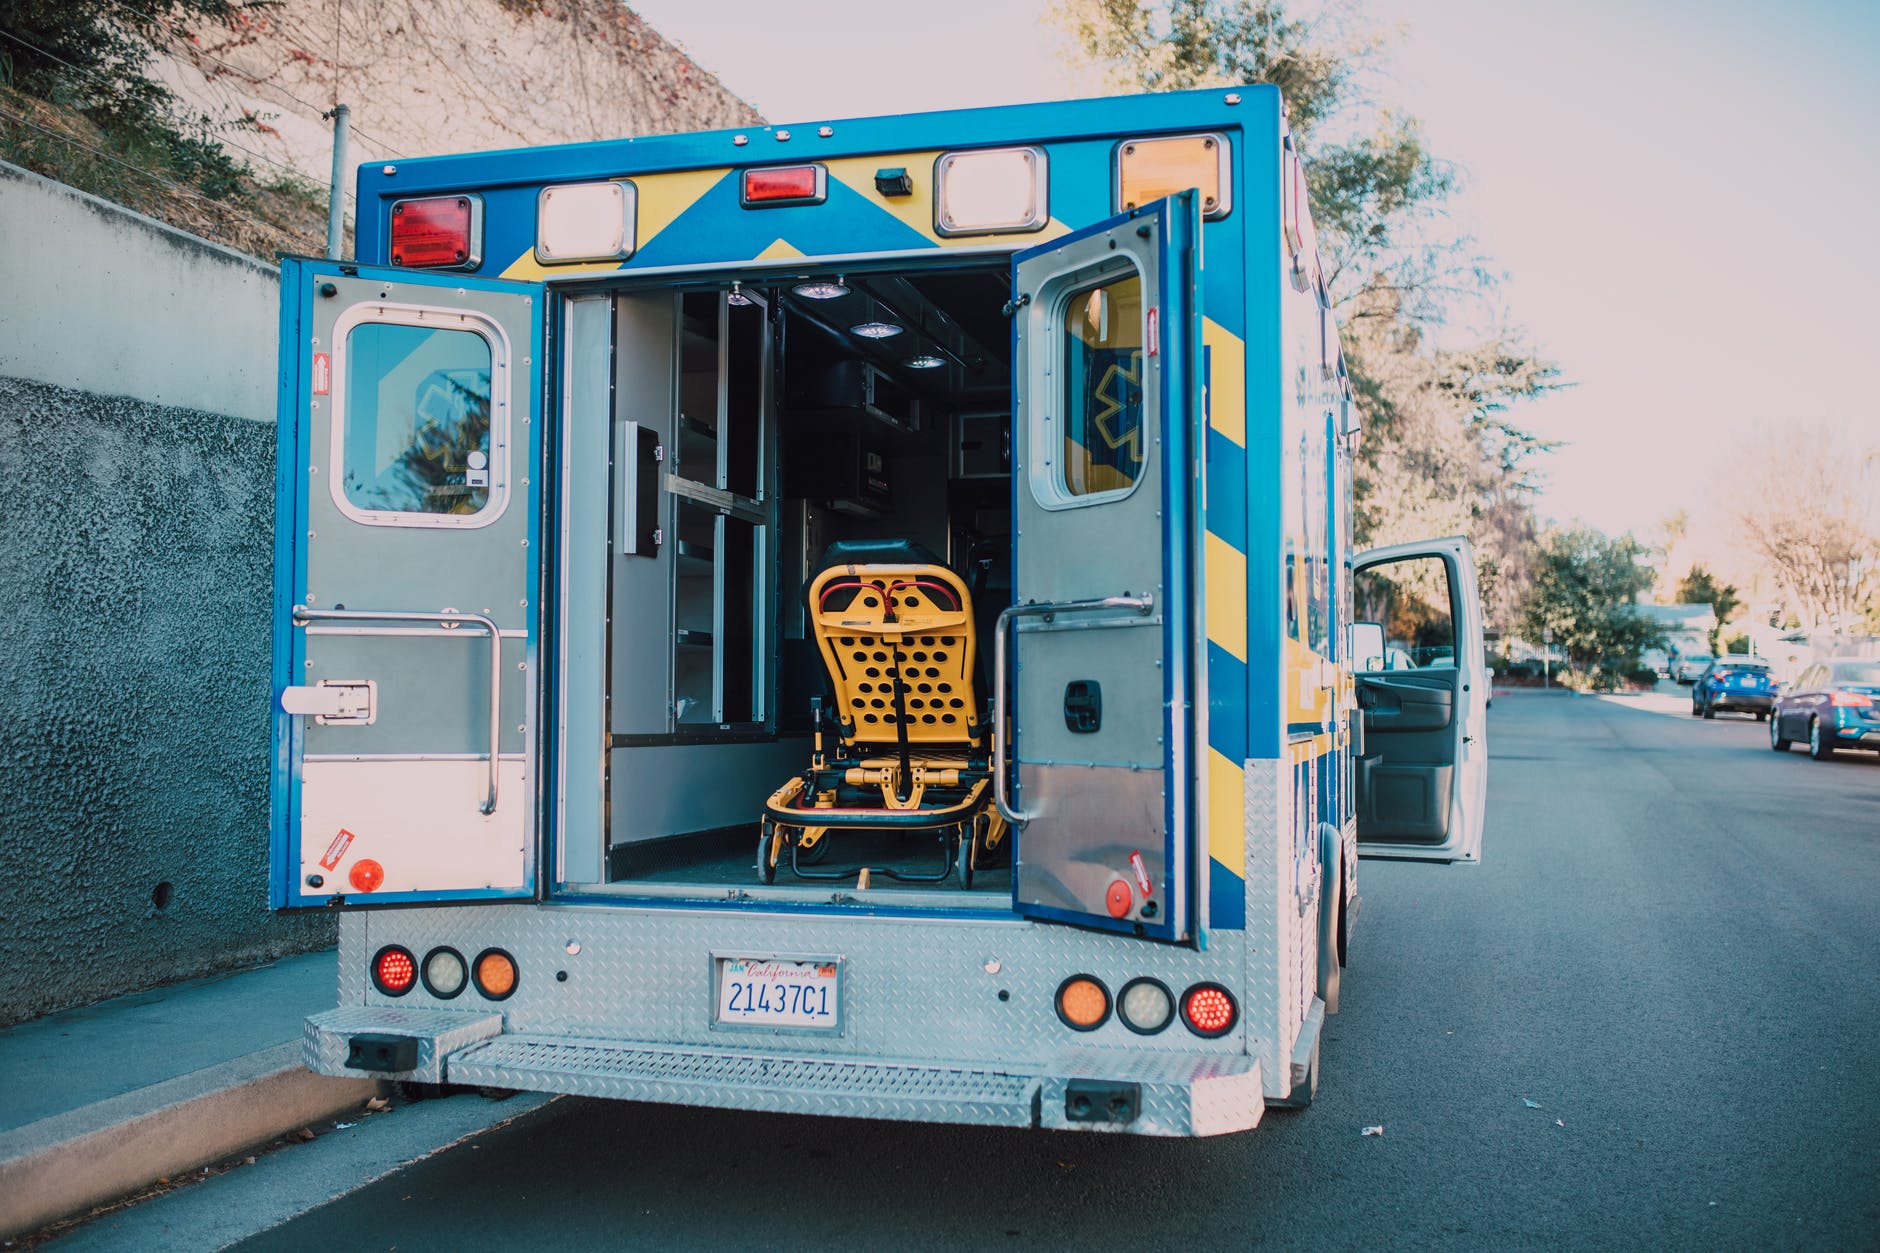 The paramedics got the older woman settled, and Oscar decided to go with them. | Source: Pexels